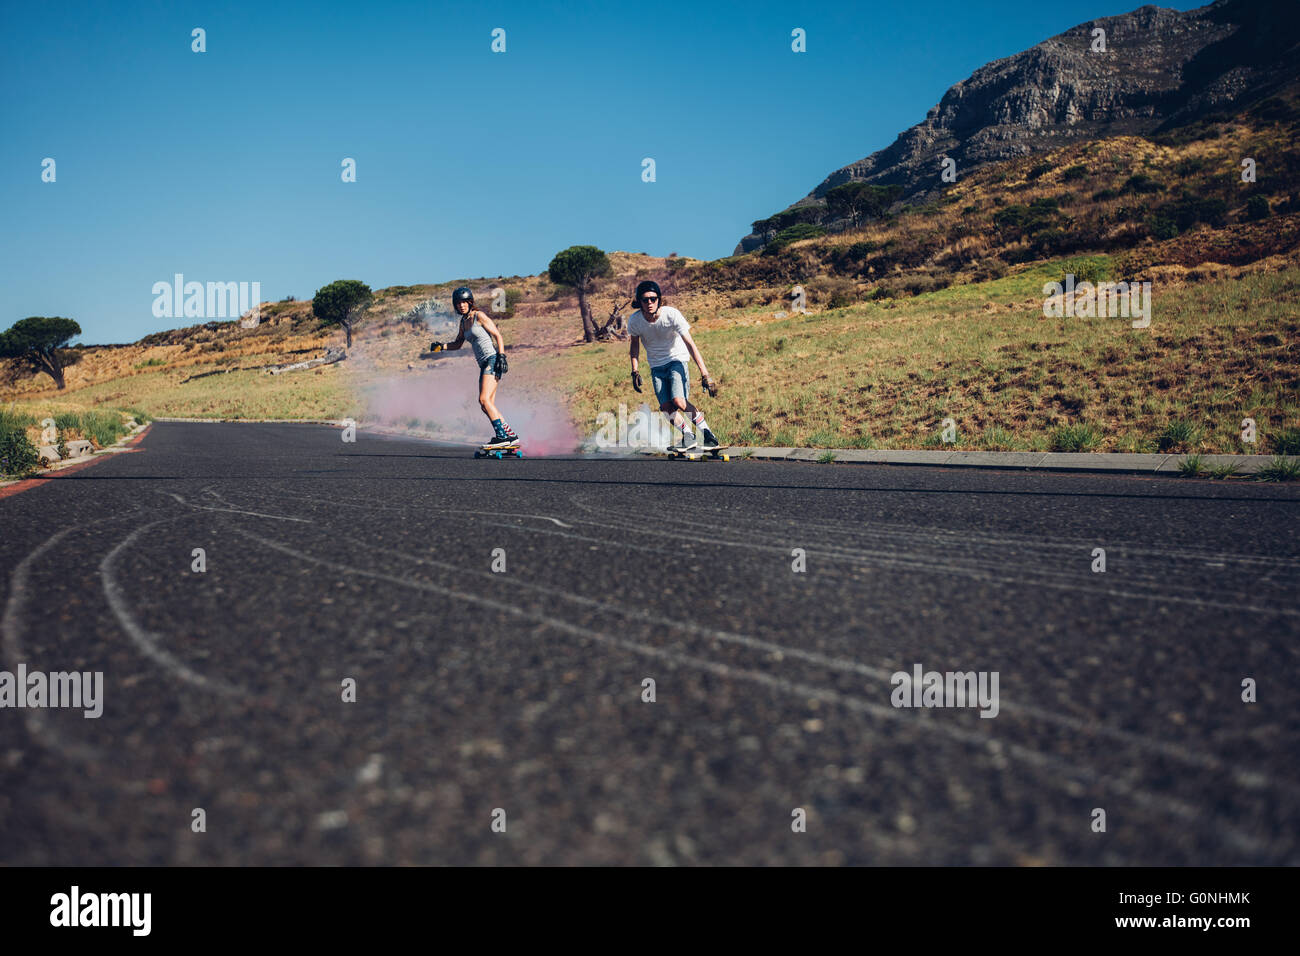 Young man and woman skateboarding with smoke bomb on the road. Young couple practicing skating on a open road. Stock Photo